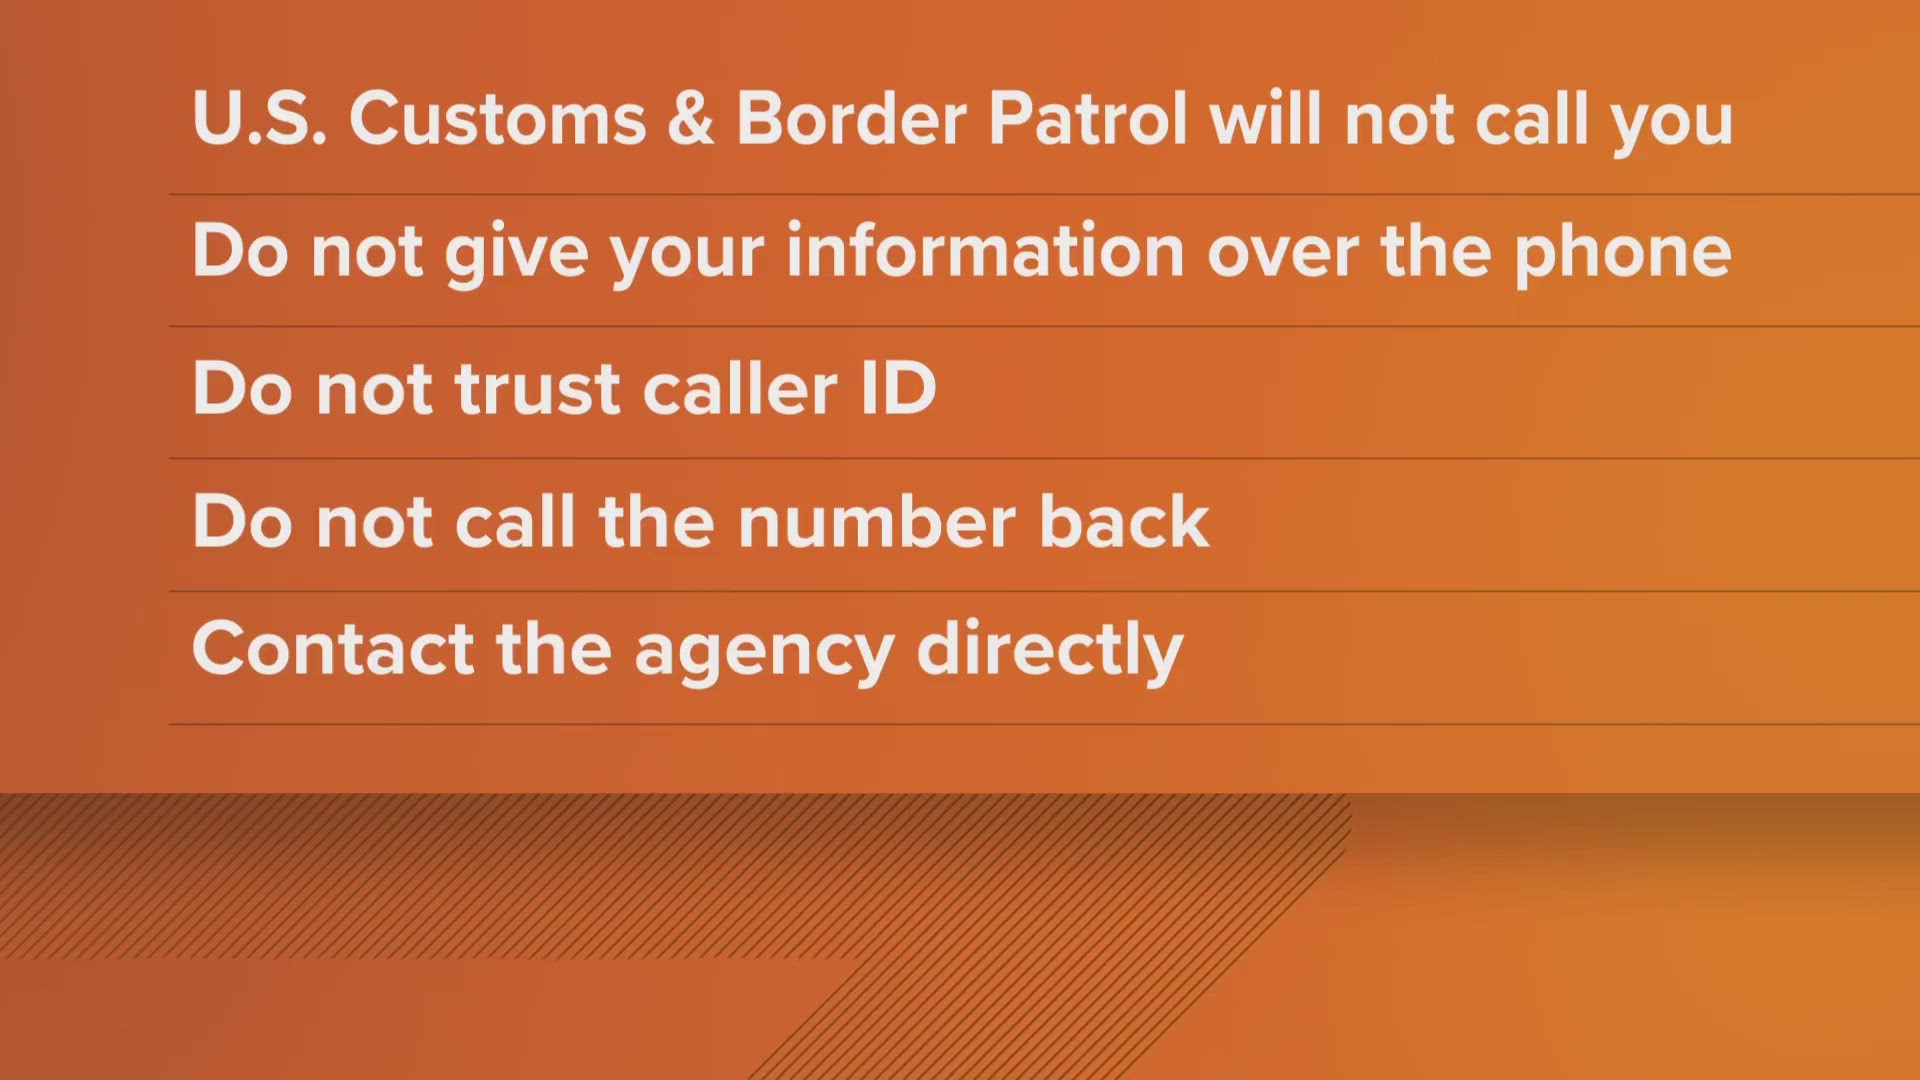 Callers posing as U.S. Customs and Border Patrol agents are calling, trying to obtain personal information.